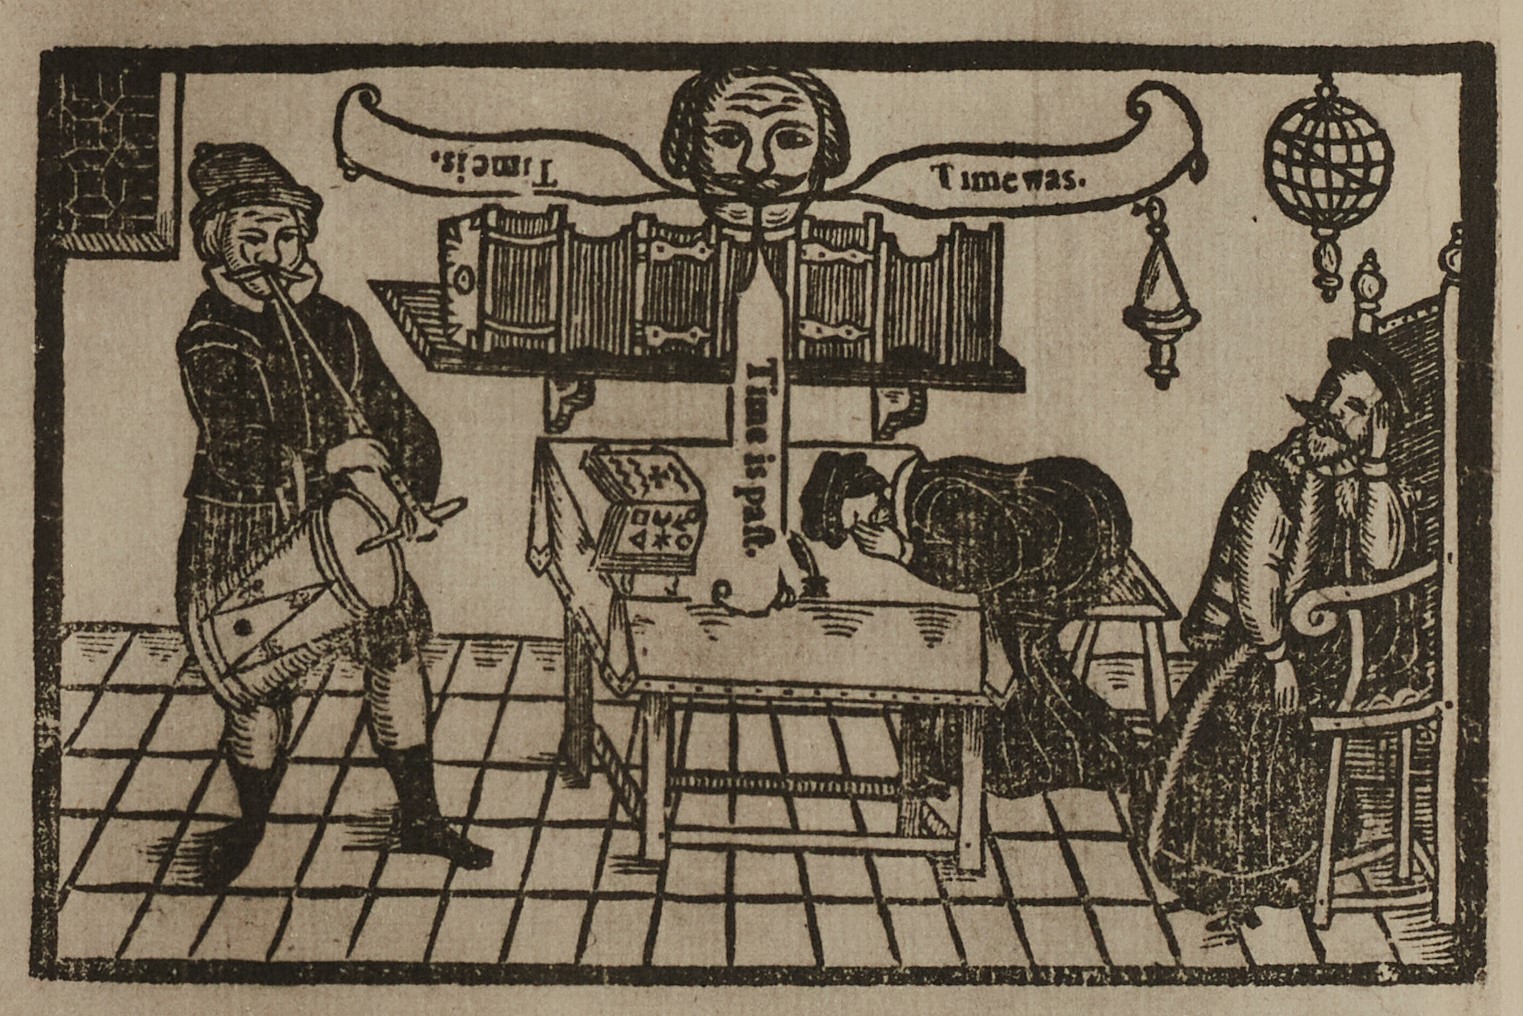 Three men, one playing a drum, one asleep with his head on the table, one seated in a chair. Above the table there is a head with words issuing from the mouth